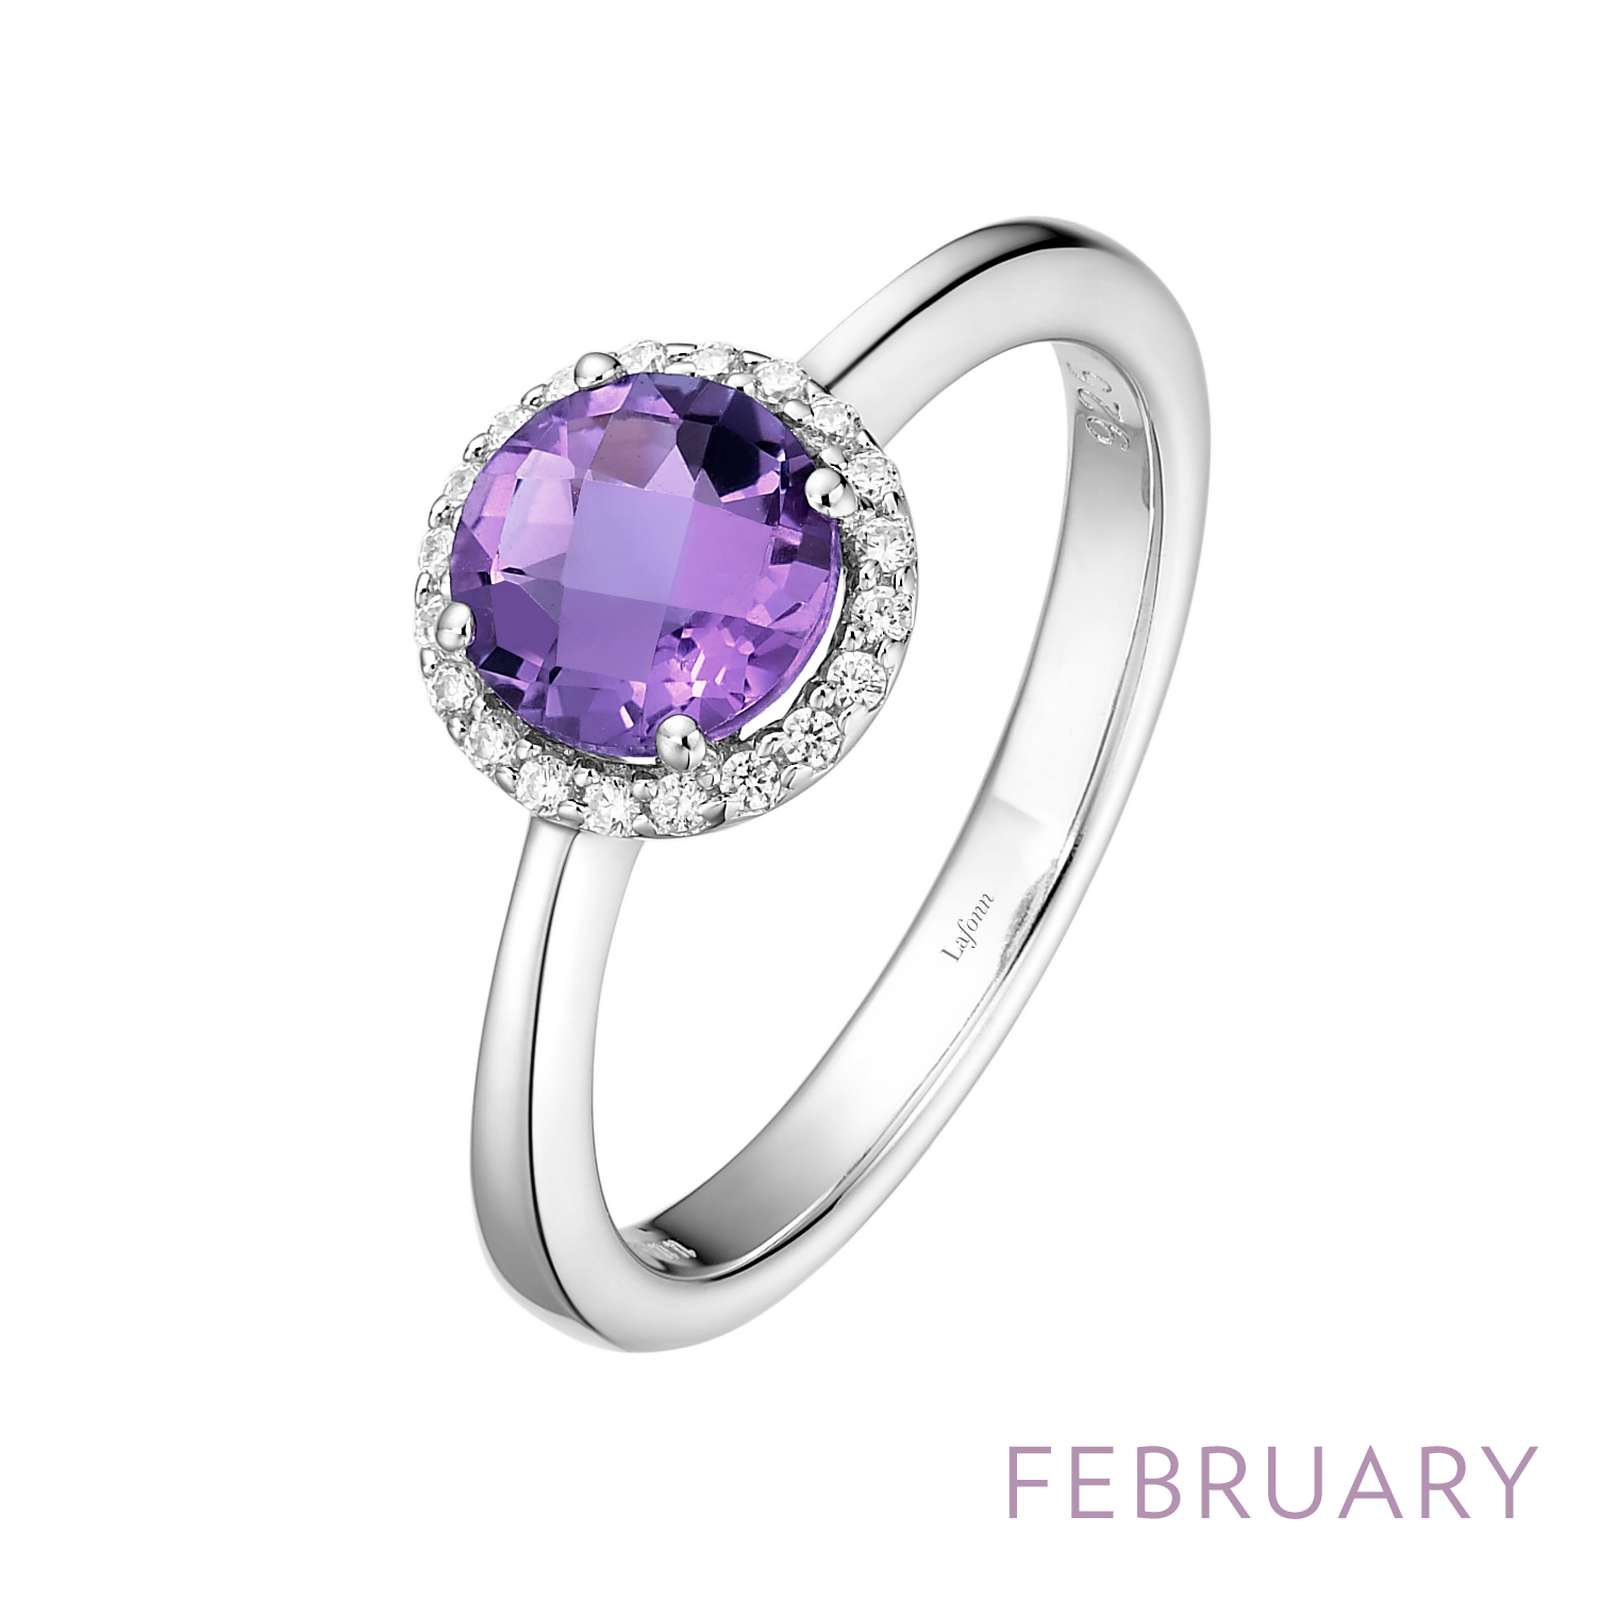 February Birthstone Ring Griner Jewelry Co. Moultrie, GA